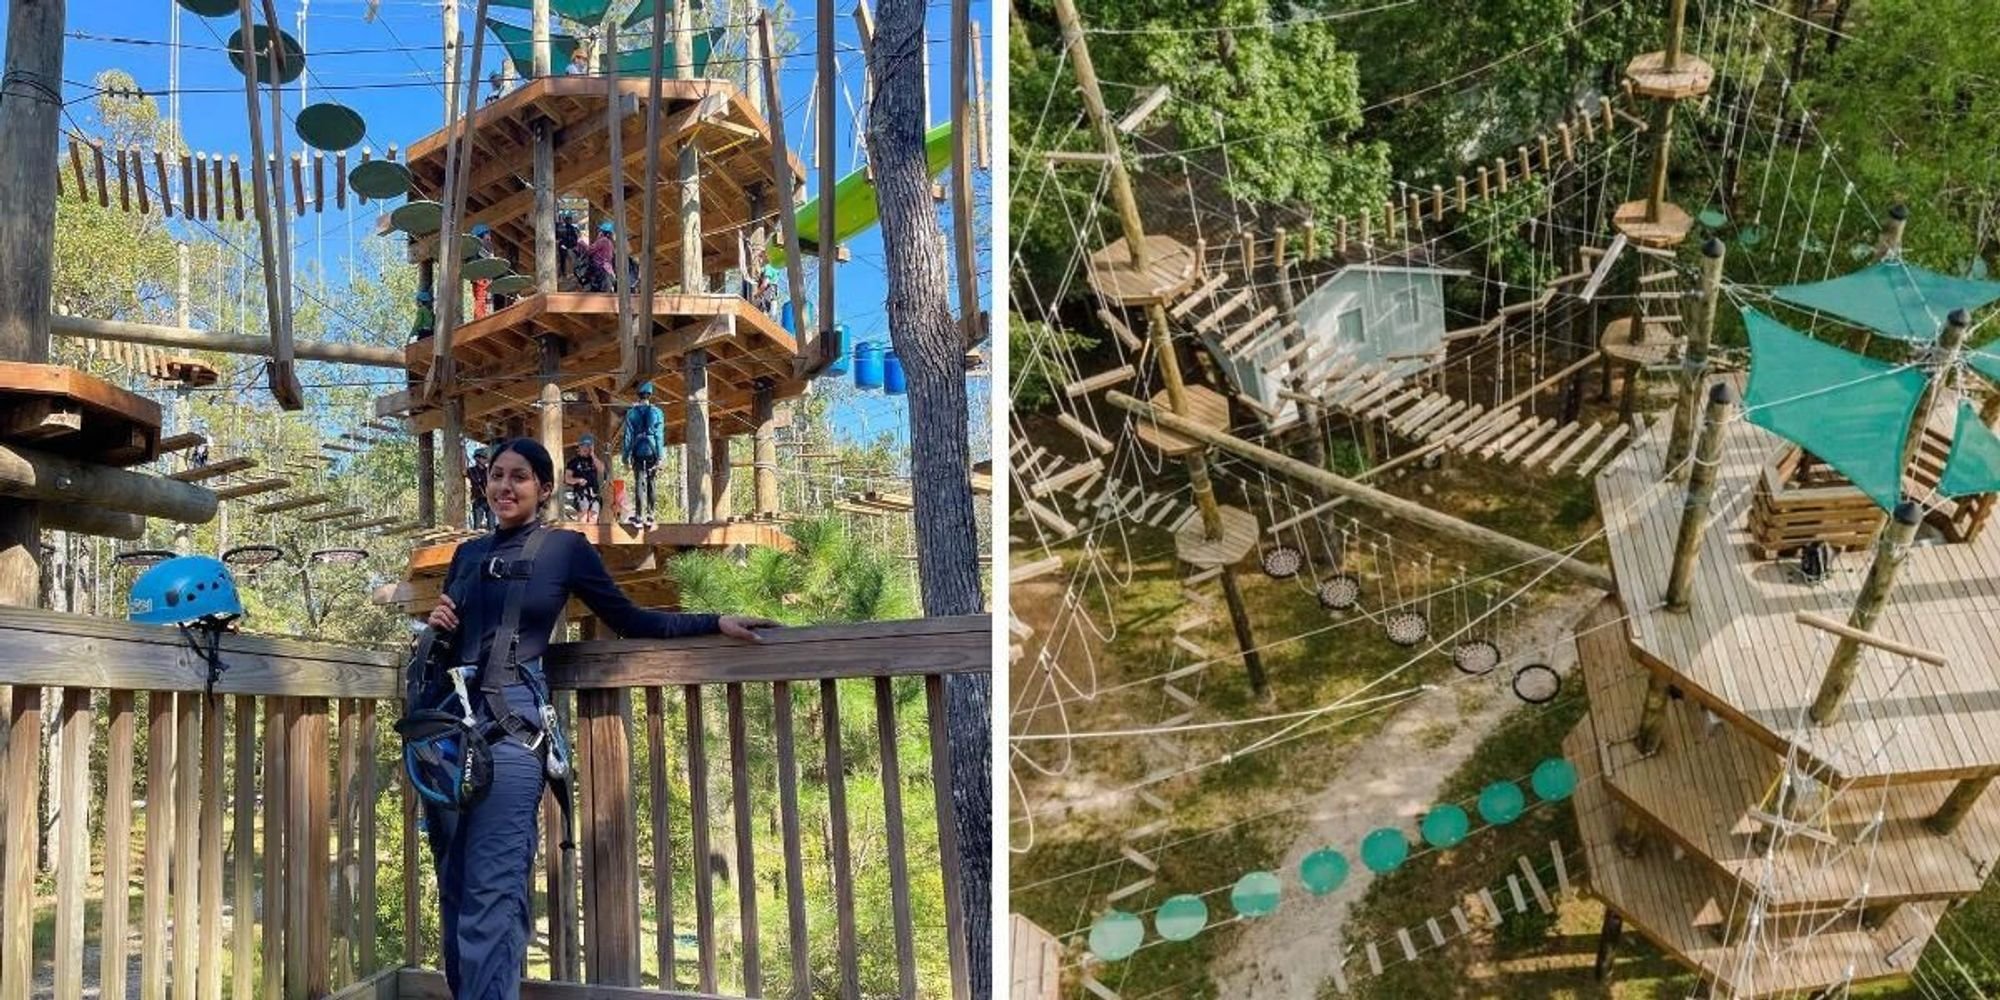 There's A Massive Treetop Obstacle Course In Texas & You Can Go At Your Own Pace